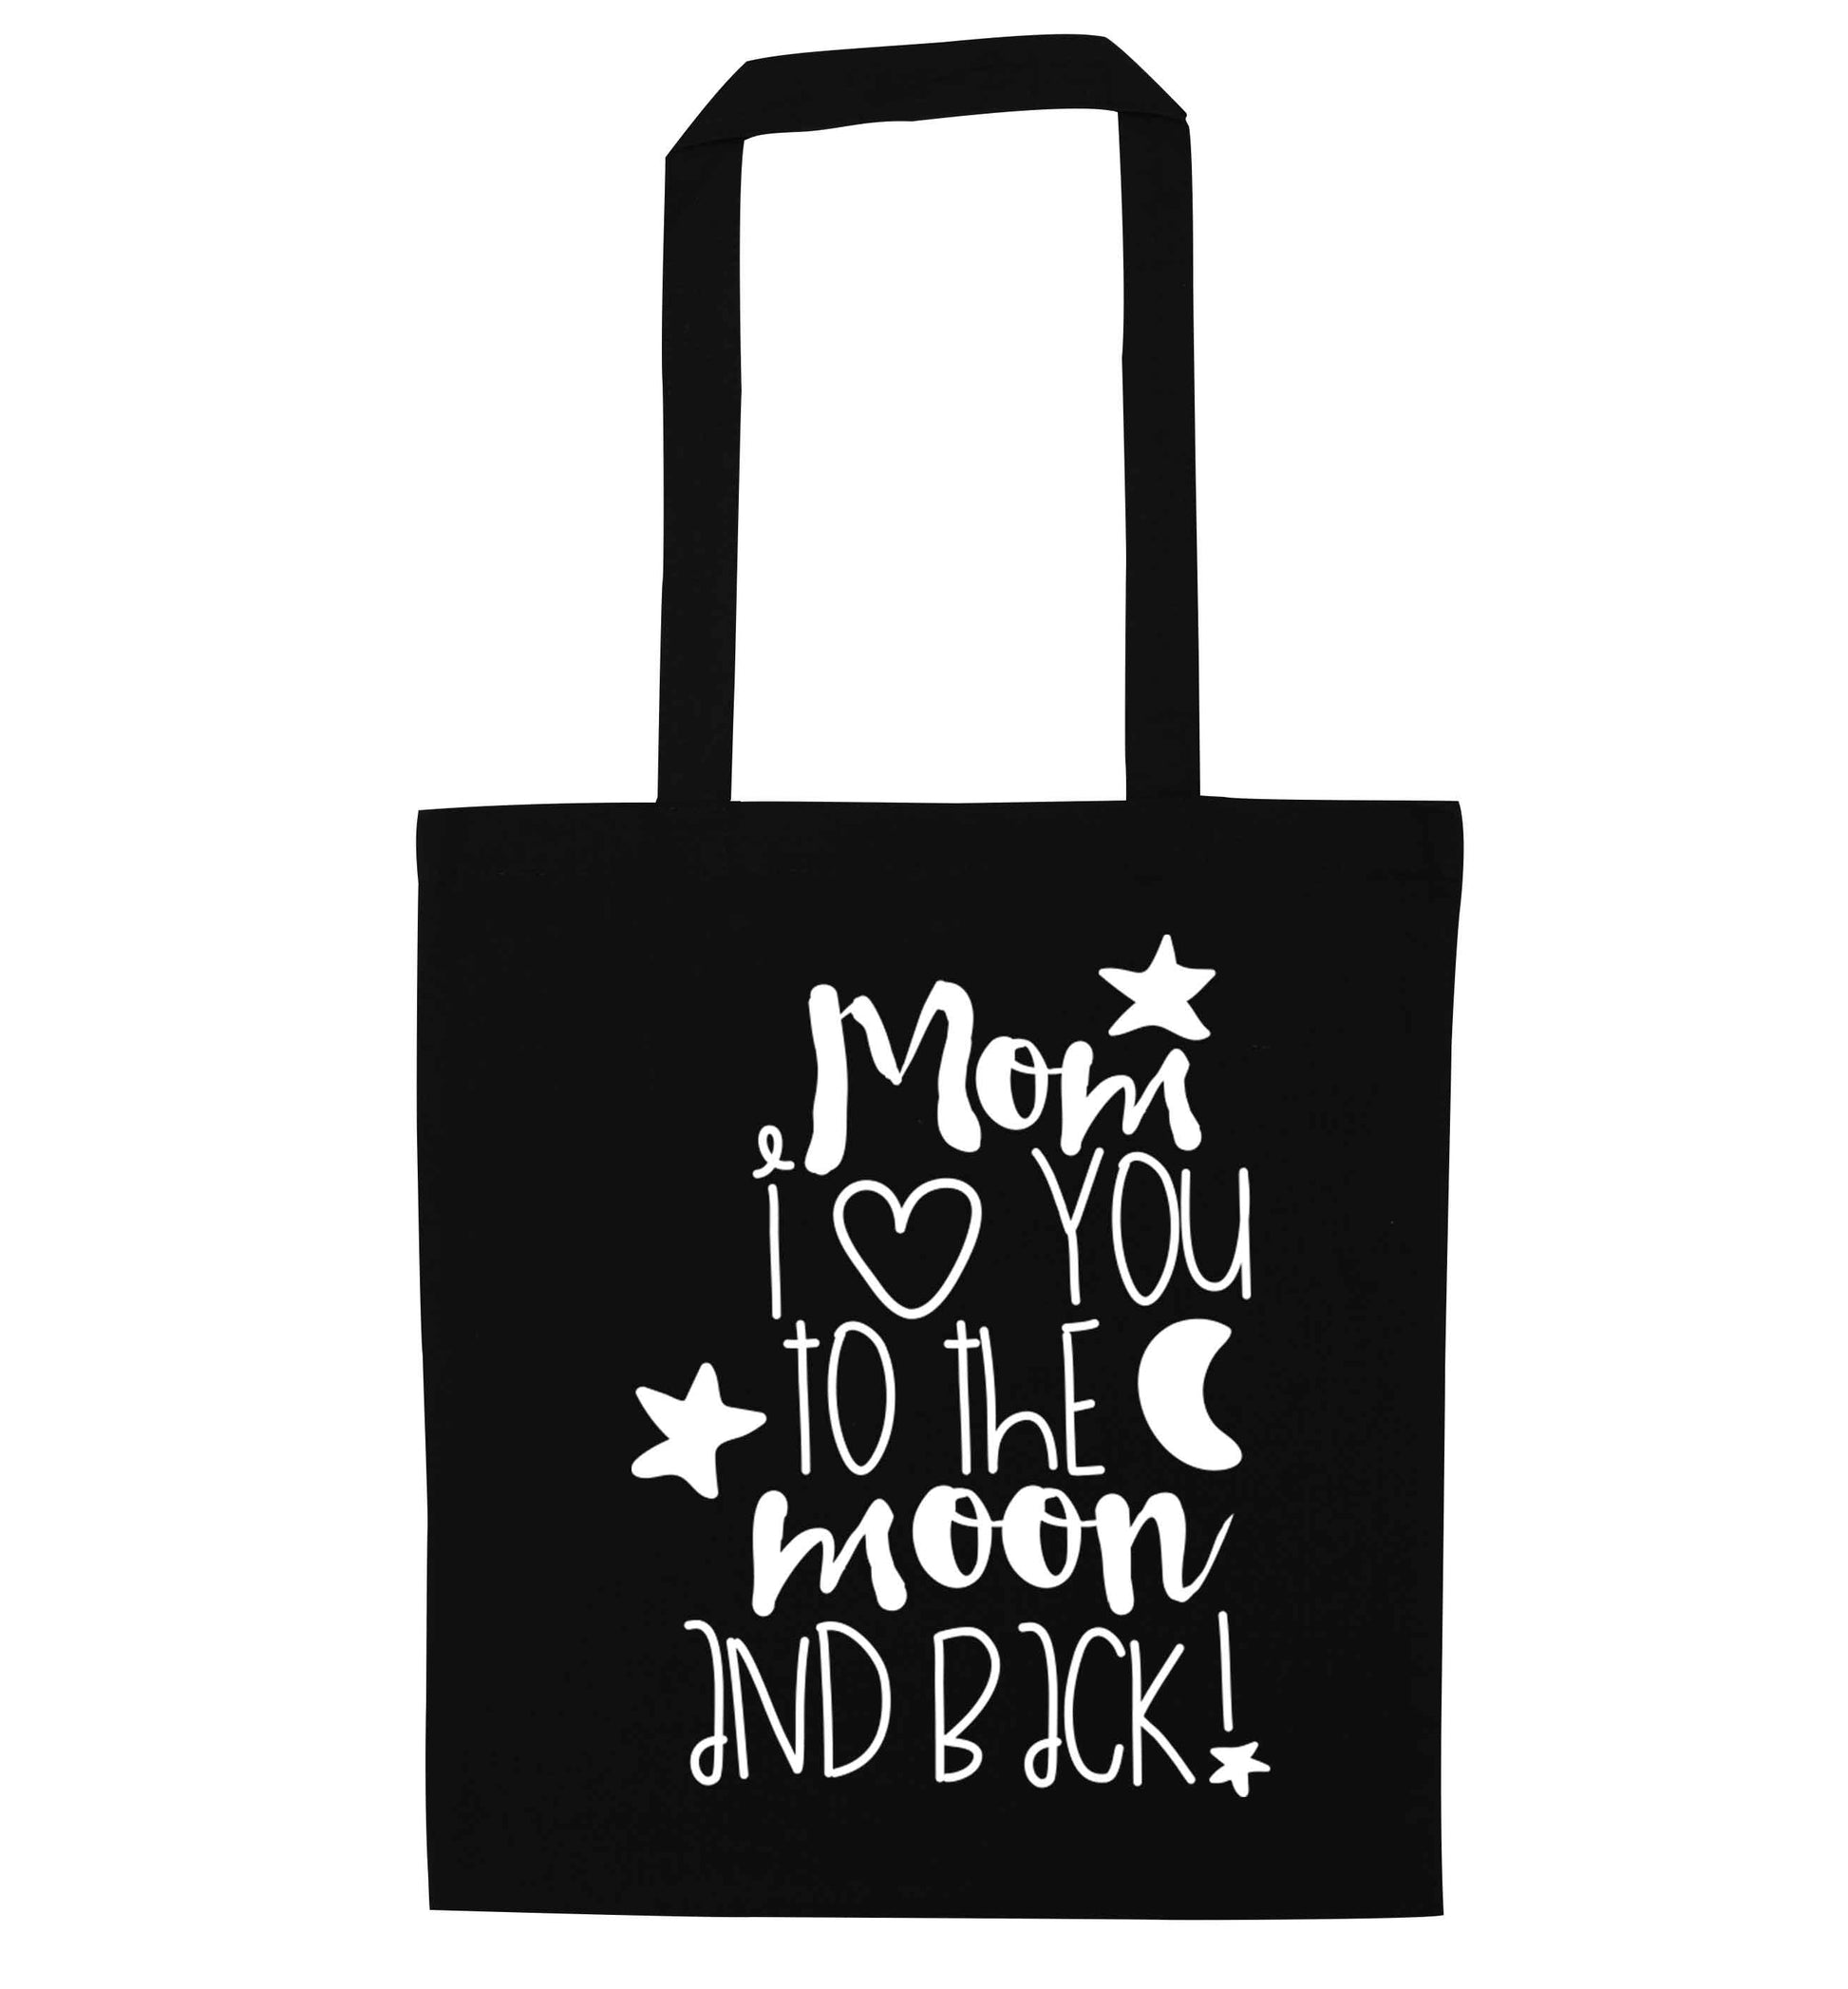 Mom I love you to the moon and back black tote bag